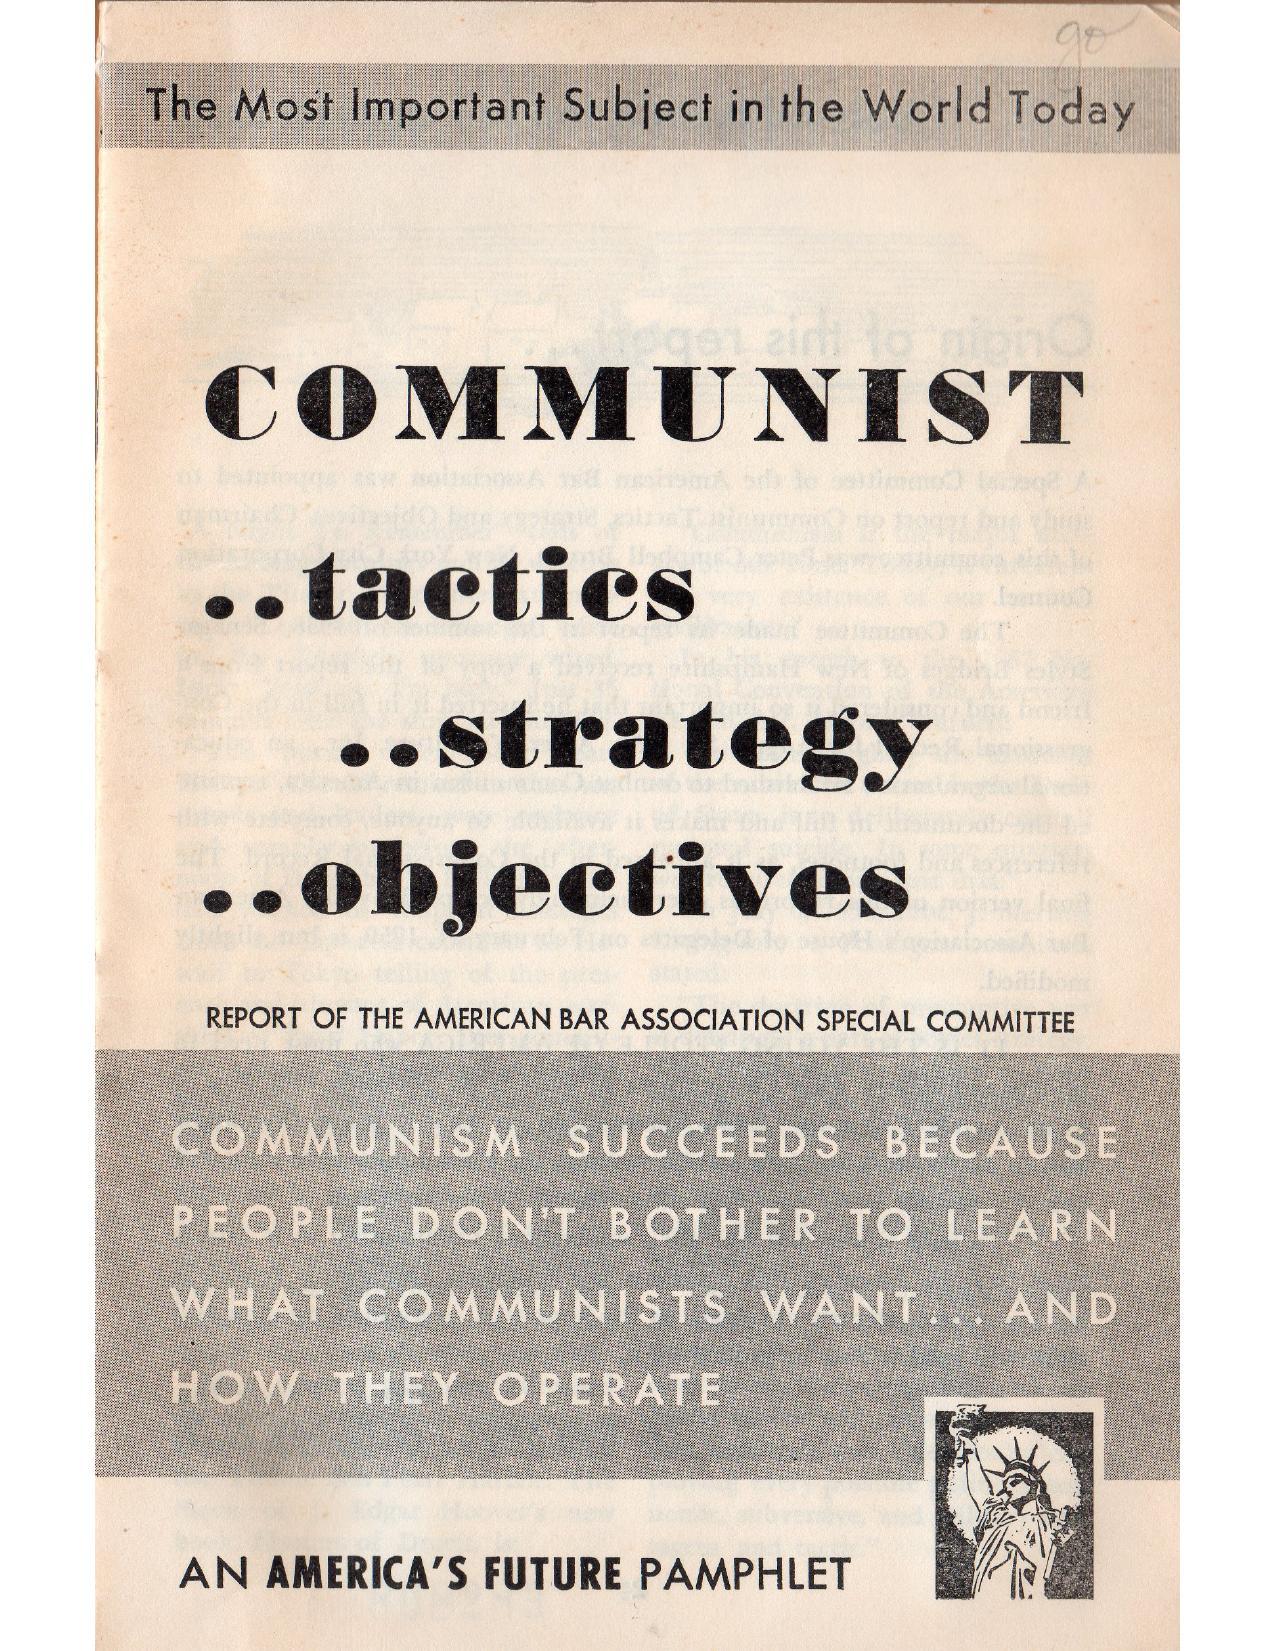 Communist Tactics, Strategy, and Objectives - Report of American Bar Association Special Committee (1959) by American Bar Association